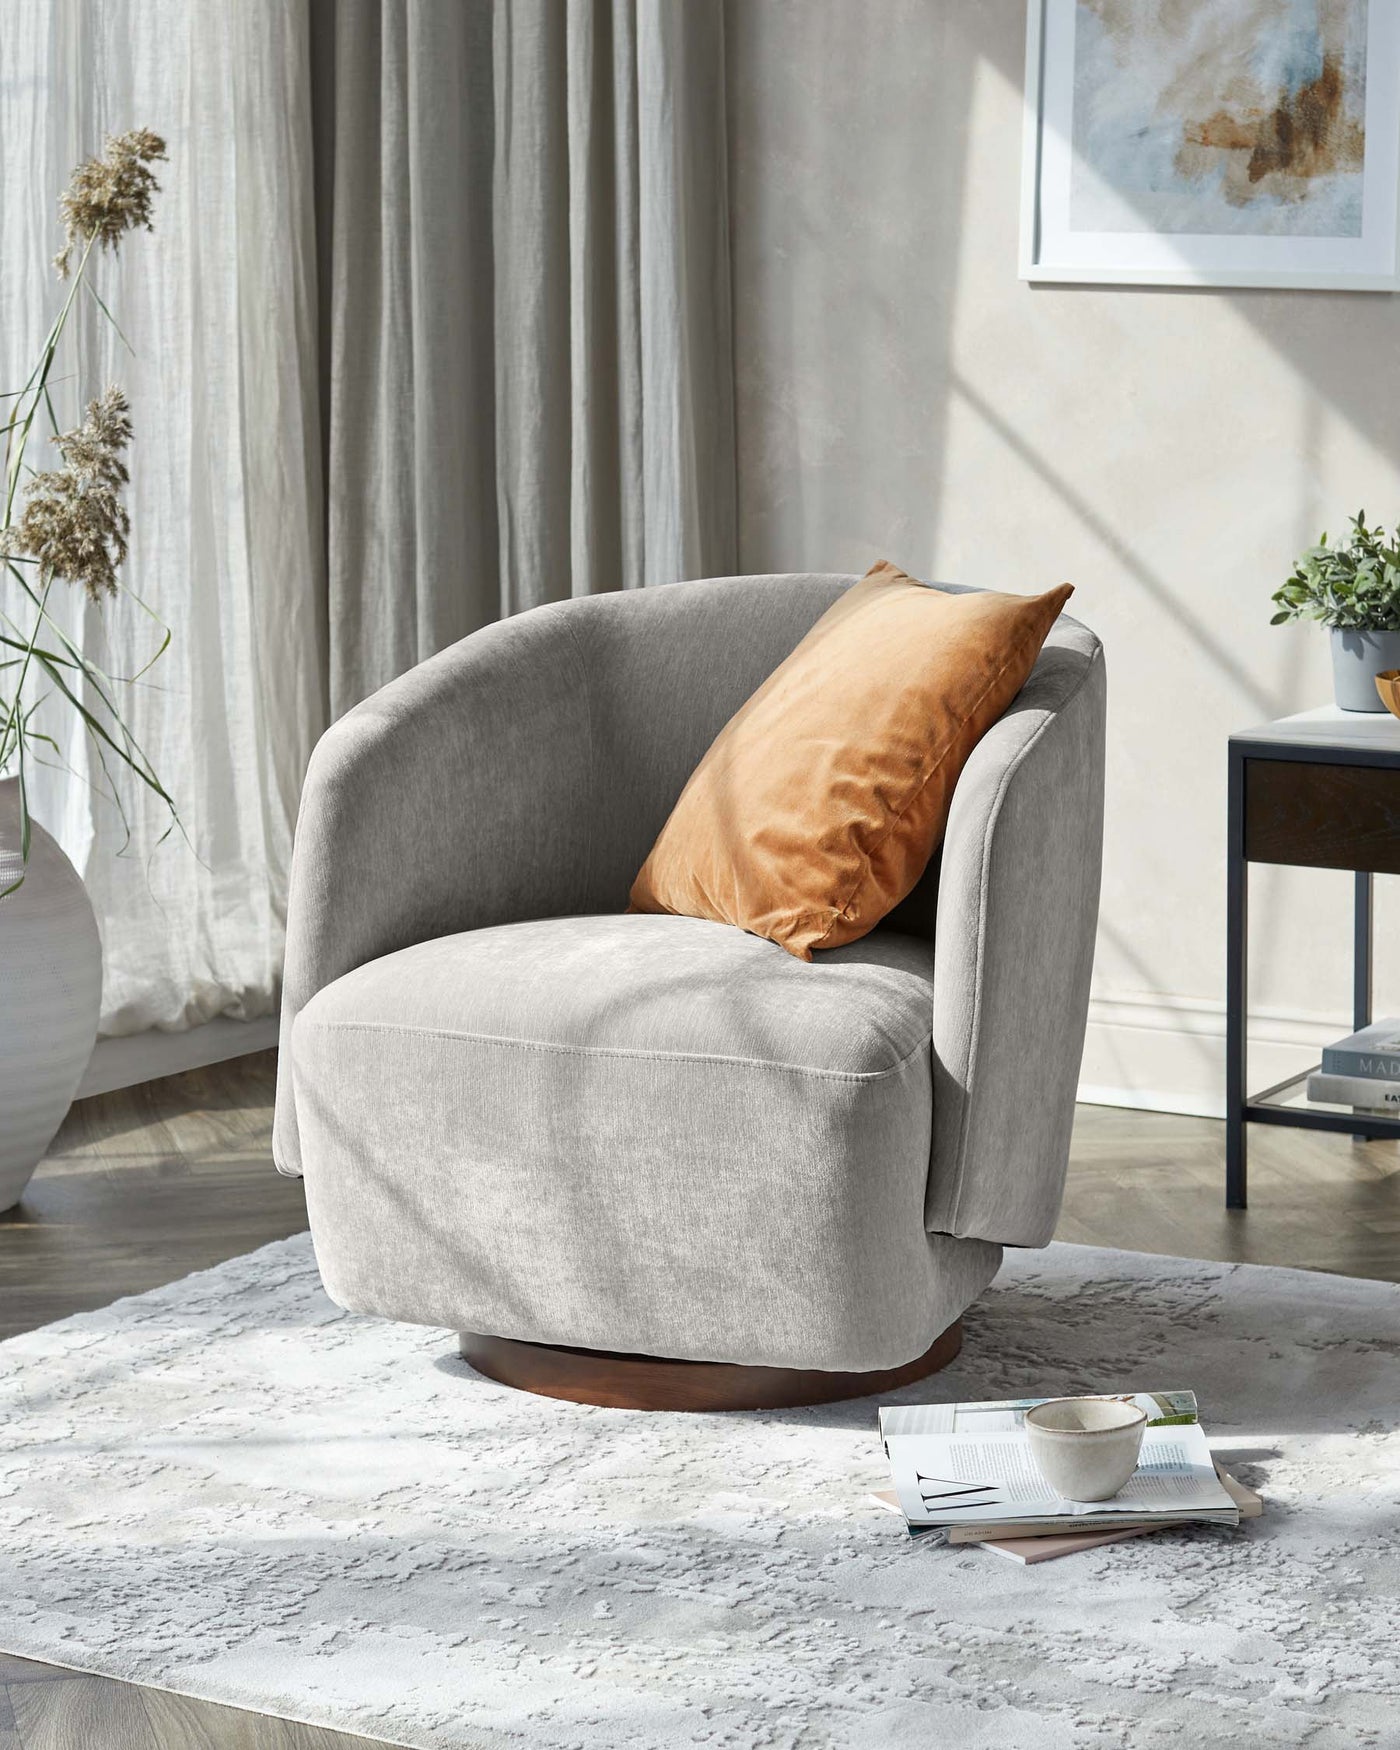 Modern light grey fabric barrel chair with plush cushioning and a golden-brown velvet accent pillow, set on a natural wood circular base. Positioned on a textured white area rug beside a small dark wood side table with books and a coffee cup, in a room with light grey curtains and abstract wall art.